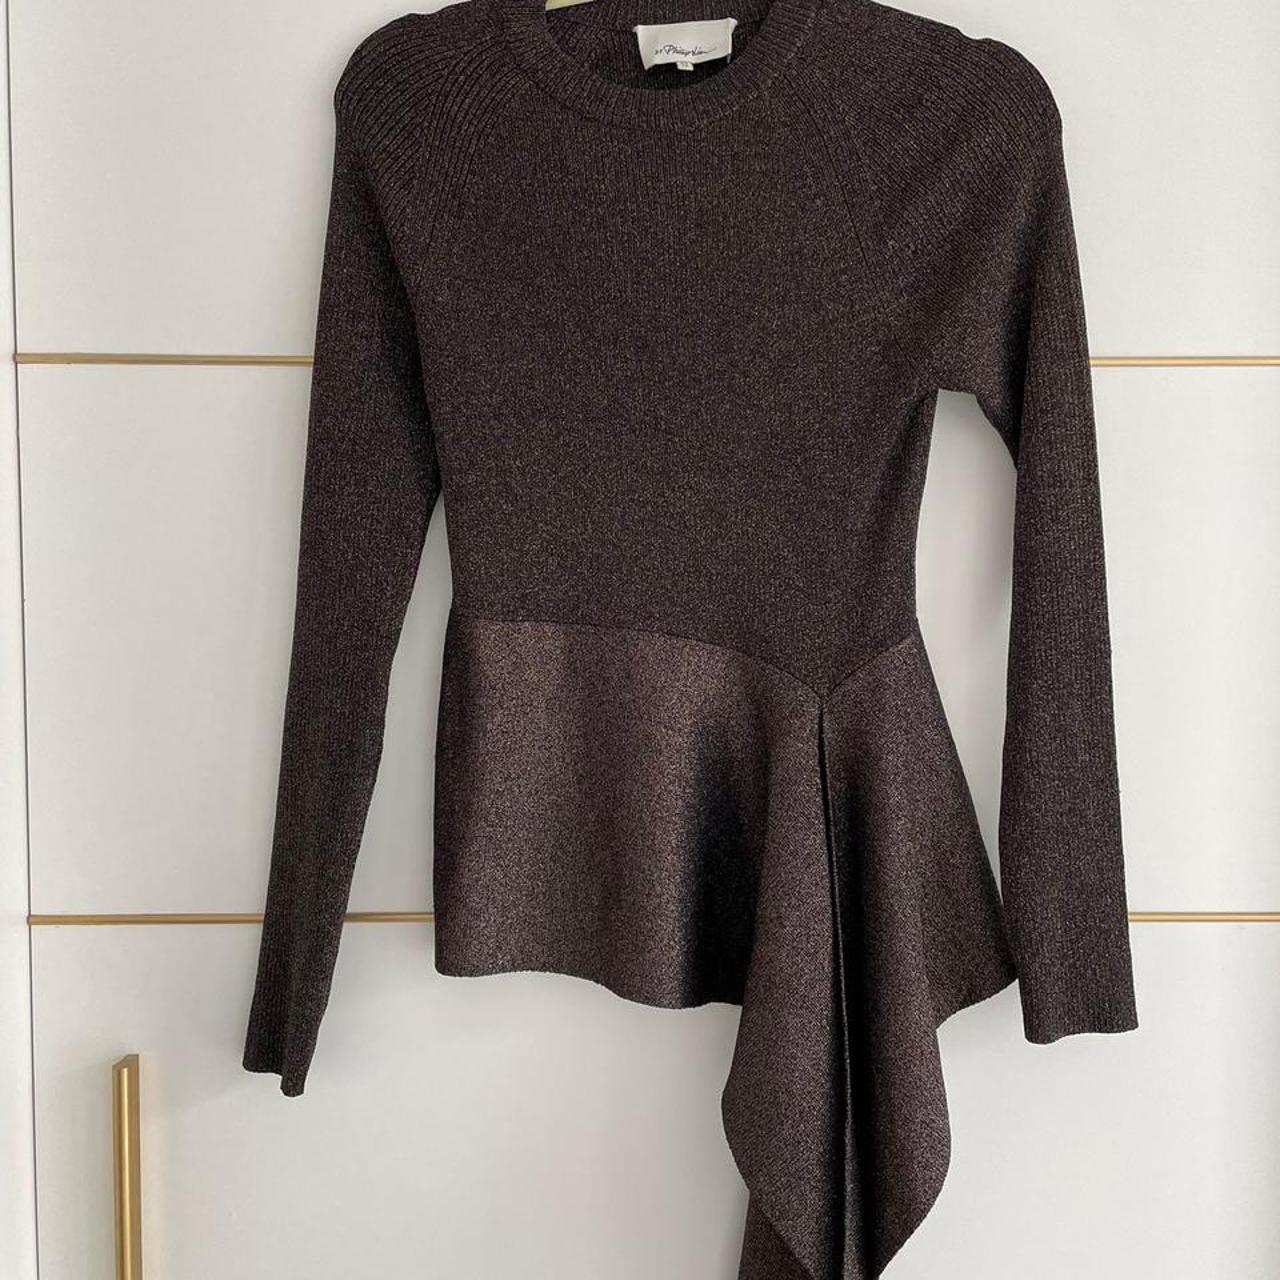 Product Image 1 - Phillip Lim brown knitted blouse.